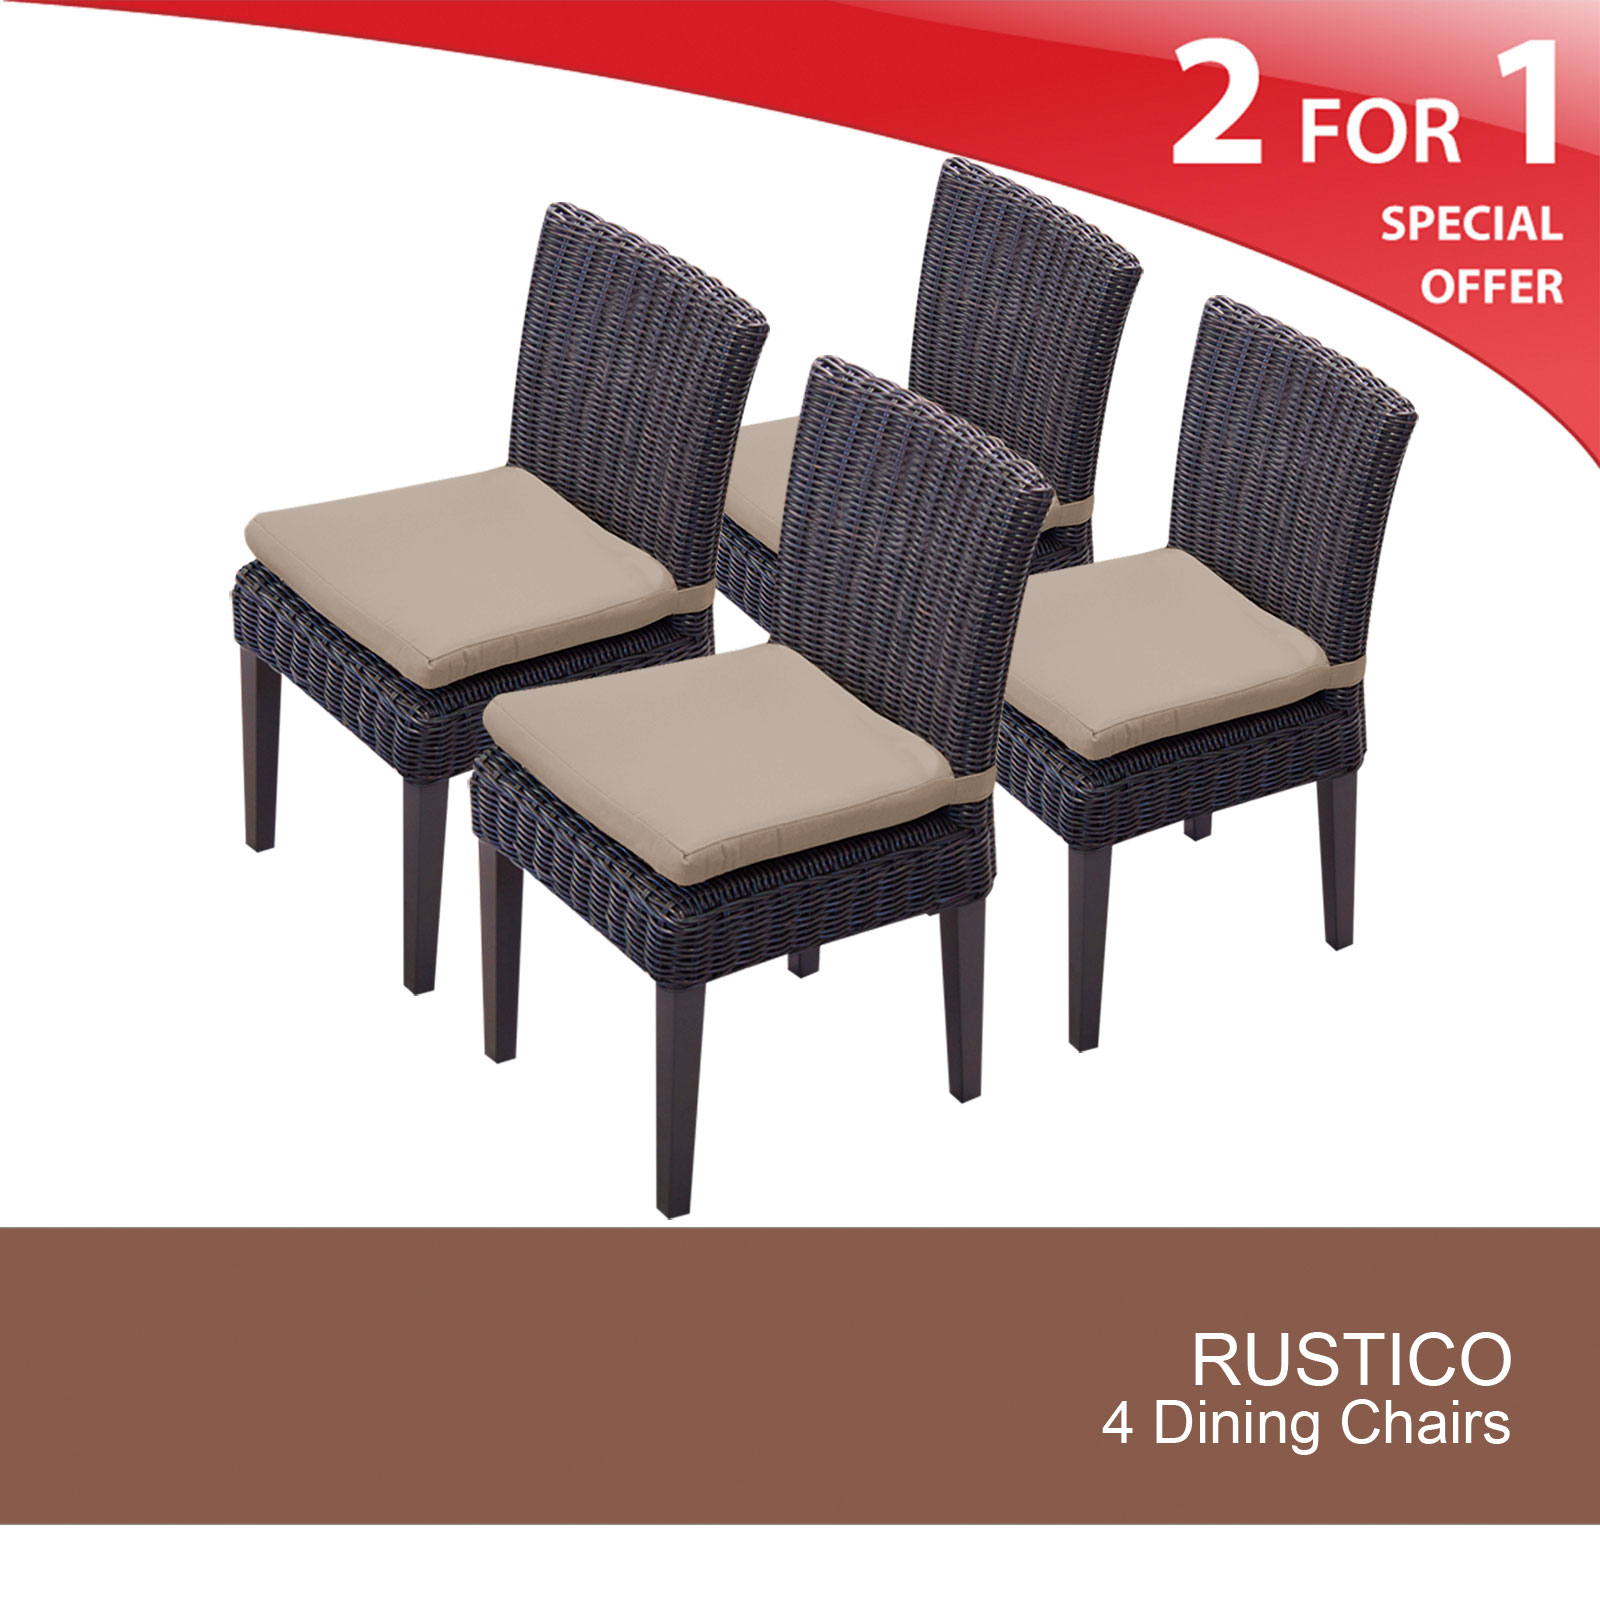 TK Classics 4 Rustico Armless Dining Chairs